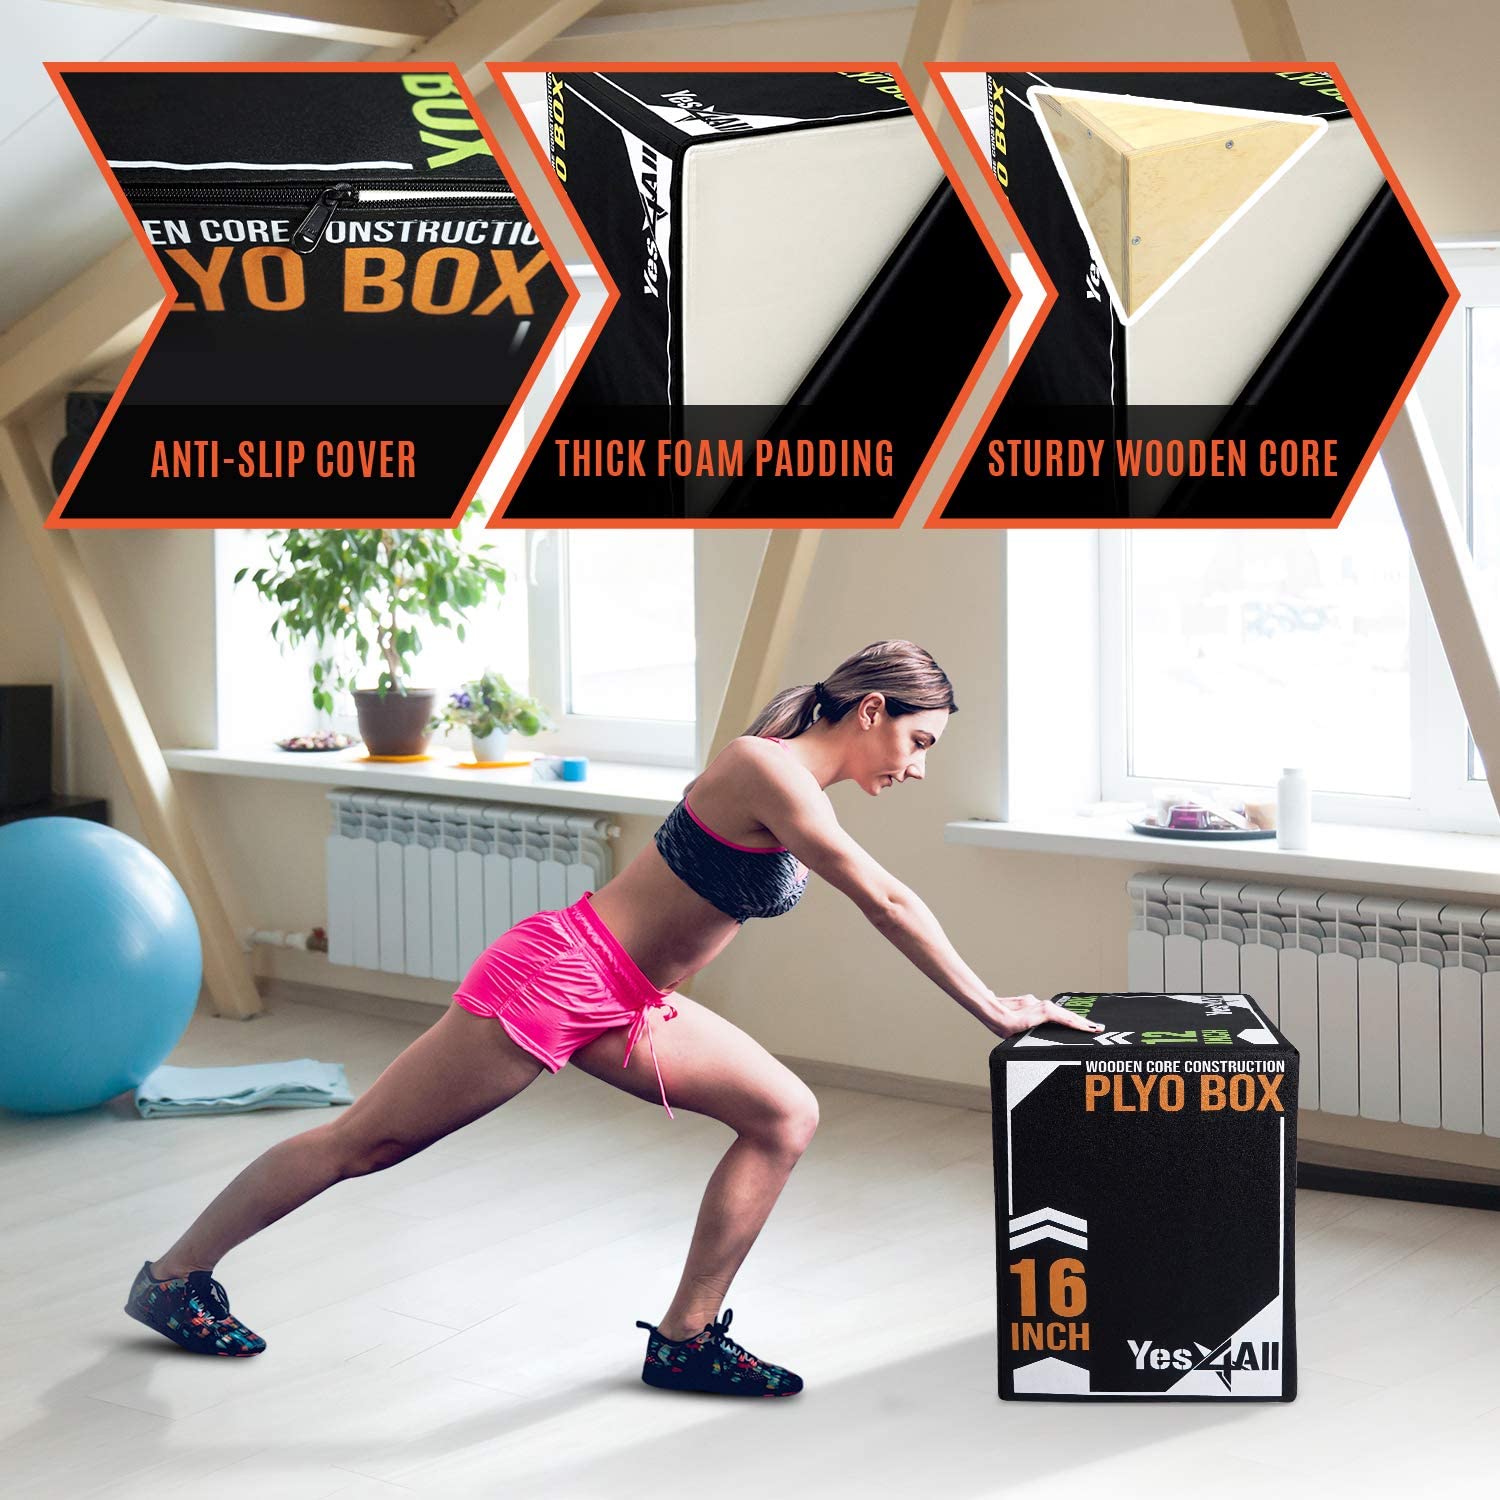 Yes4All 3-in-1 16"x14"x12" Soft Plyo Box Wooden Core, Foam for Jumping Exercise, Crossfit, Black - image 3 of 7